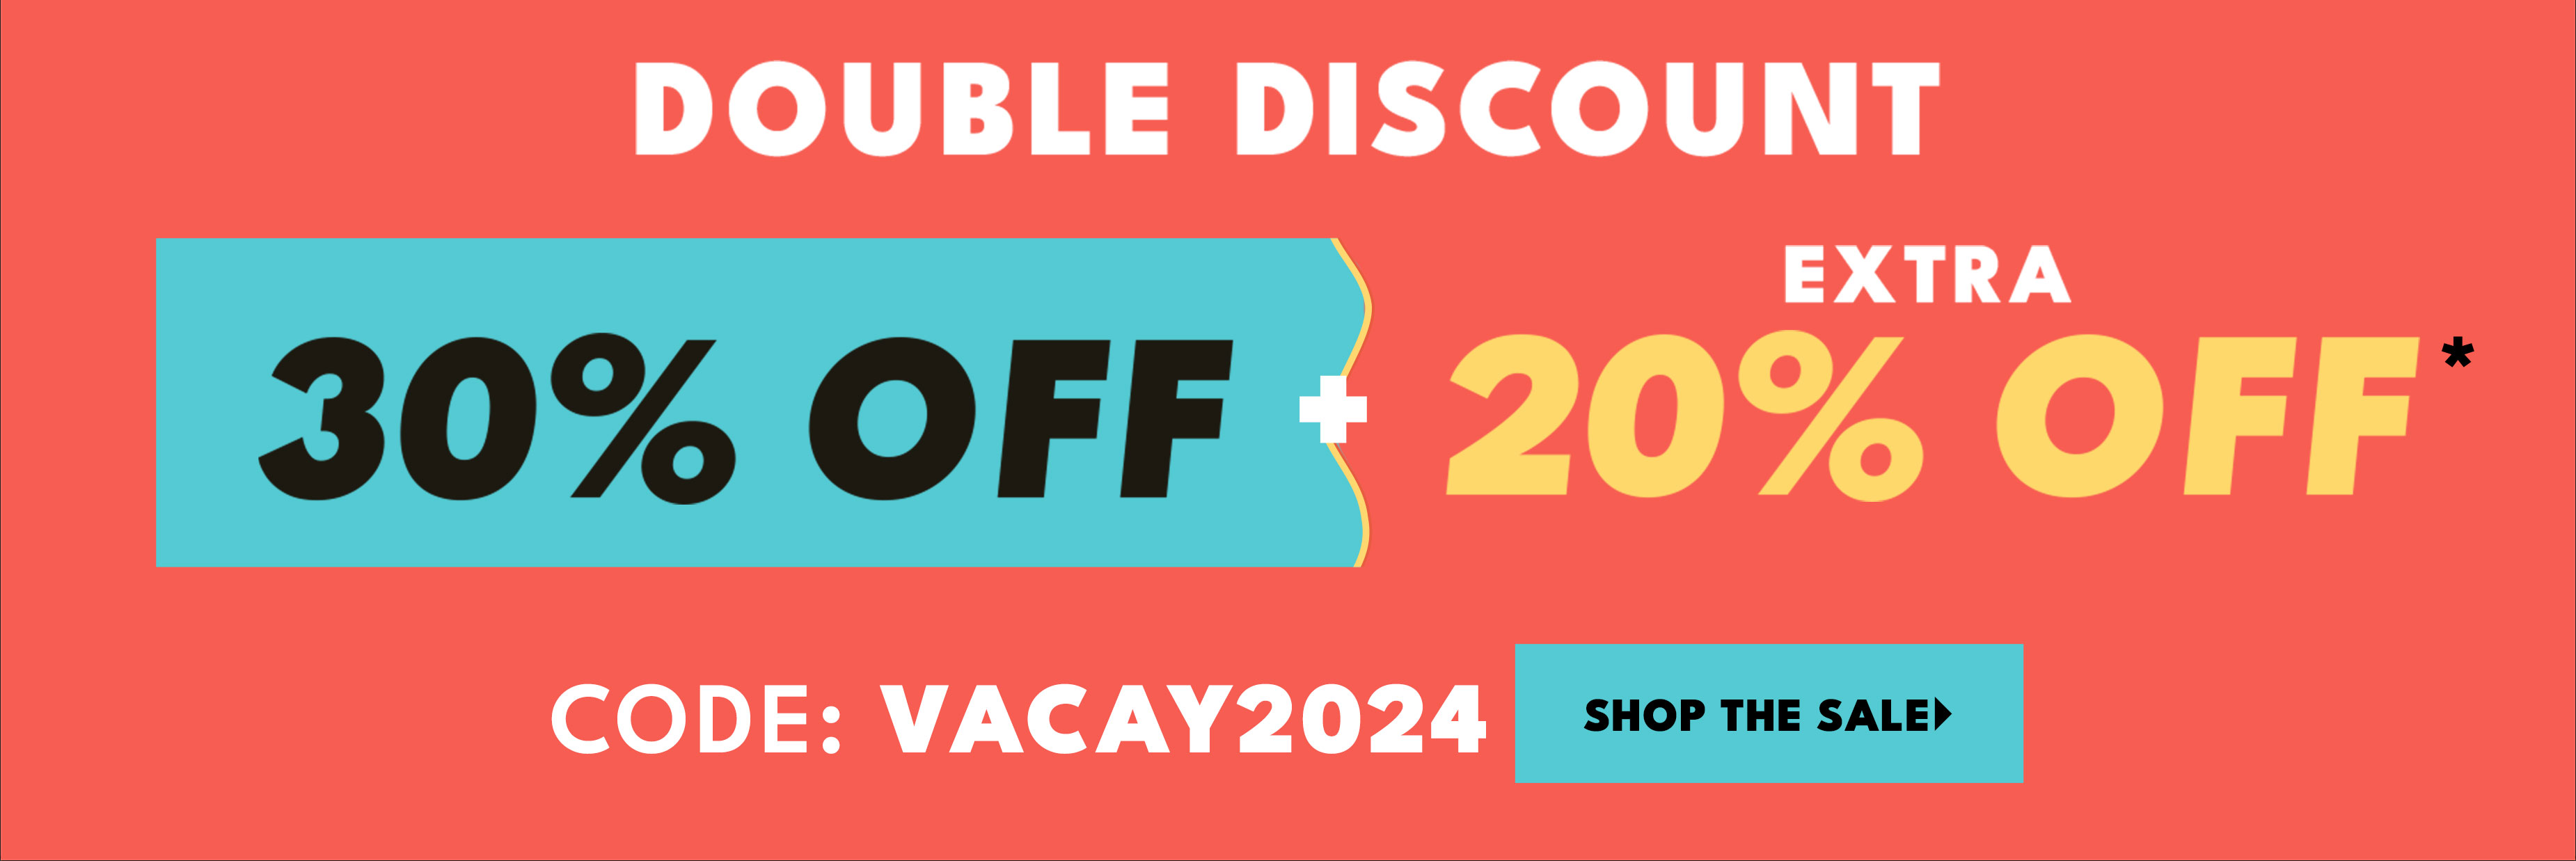 Double delight! 30% off + take an extra 20% off code VACAY2024 shop the sale